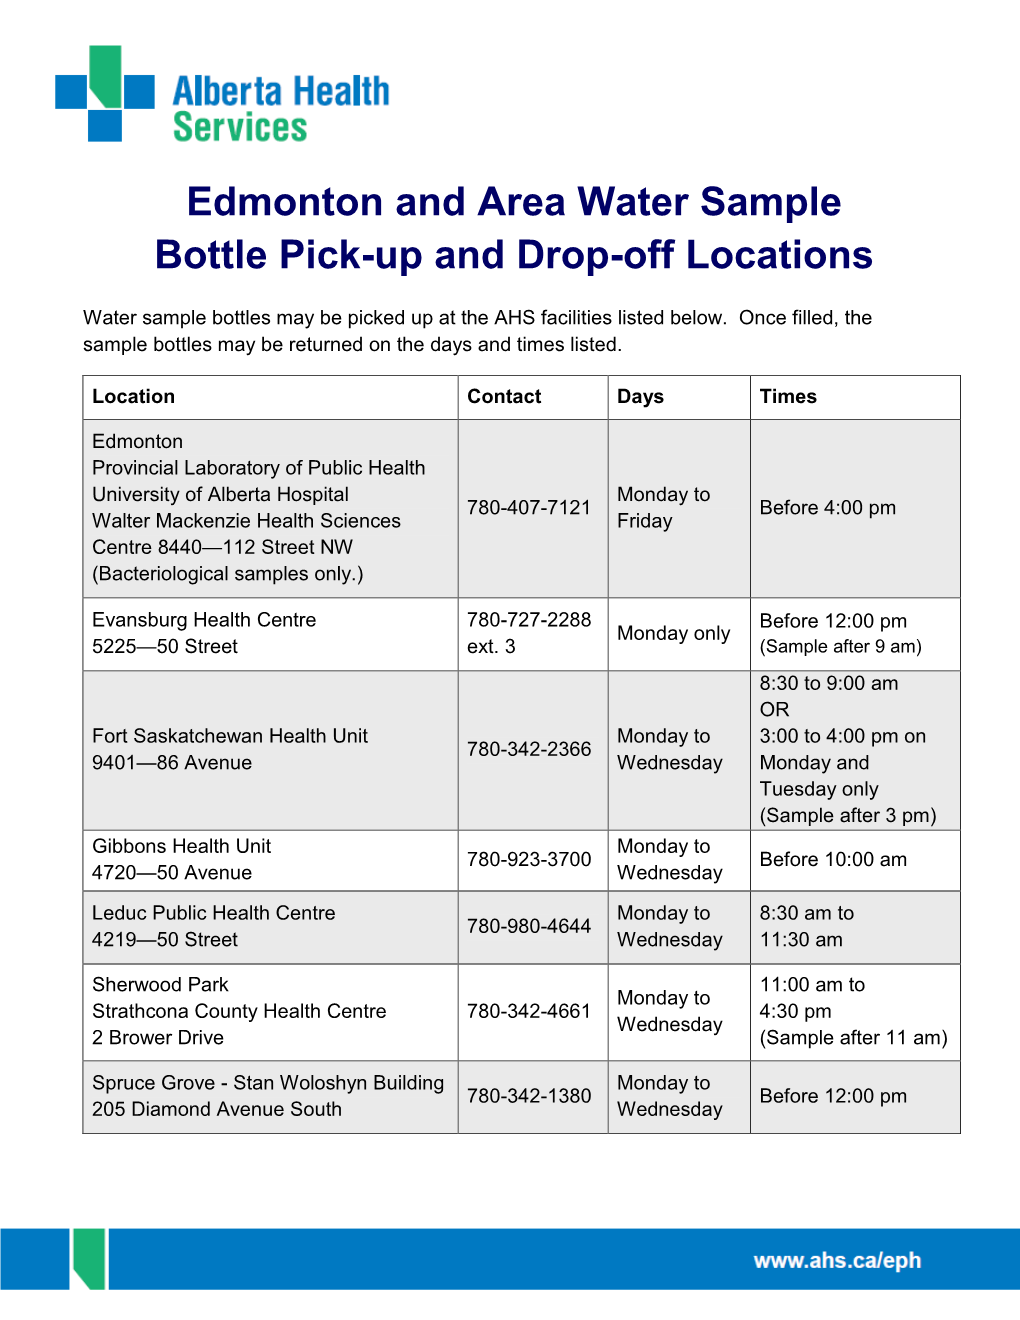 Edmonton and Area Water Sample Bottle Pick-Up and Drop-Off Locations